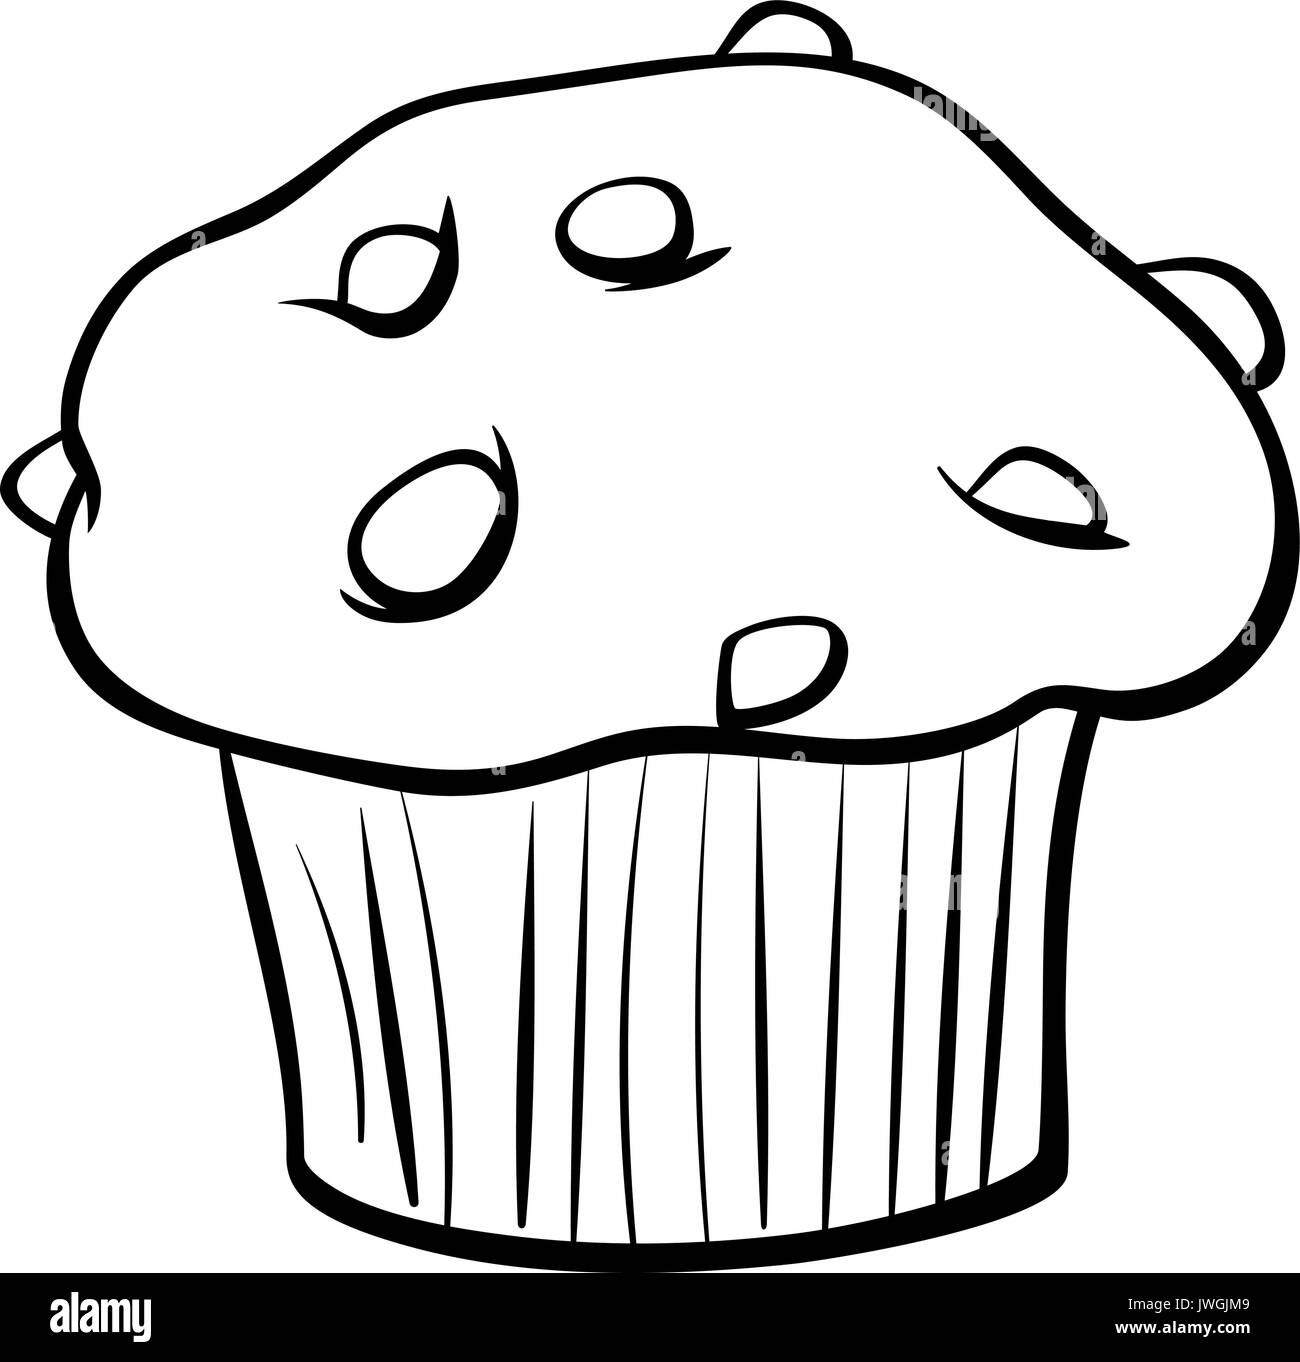 Black and White Cartoon Illustration of Sweet Muffin Cake with Chunks of Chocolate Clip Art Food Object Coloring Book Stock Vector